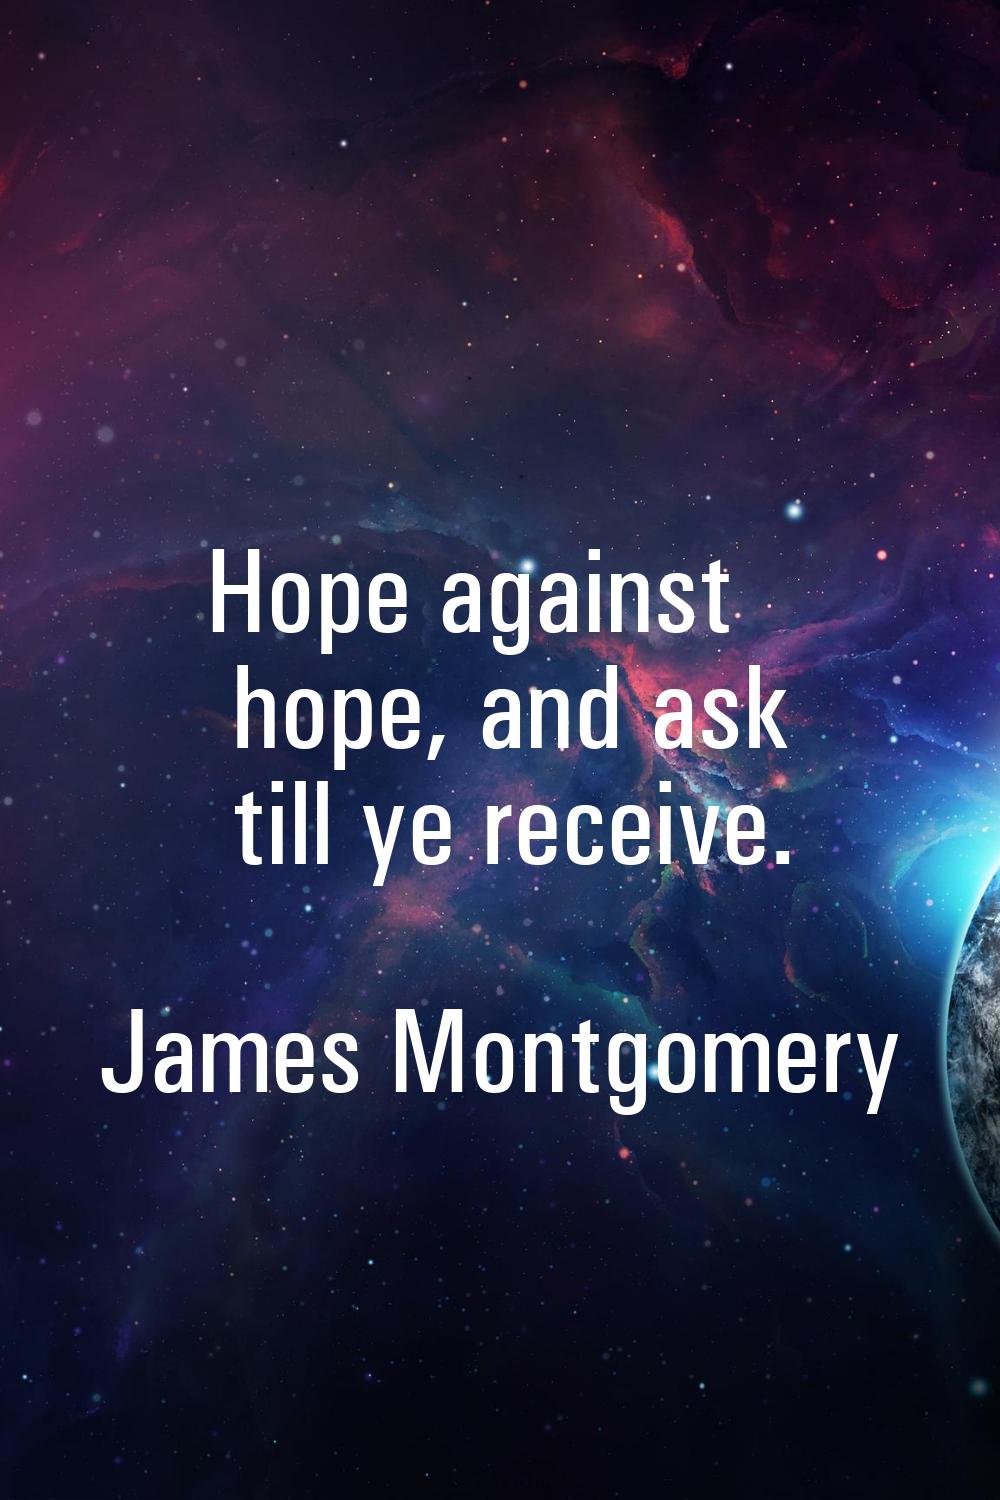 Hope against hope, and ask till ye receive.